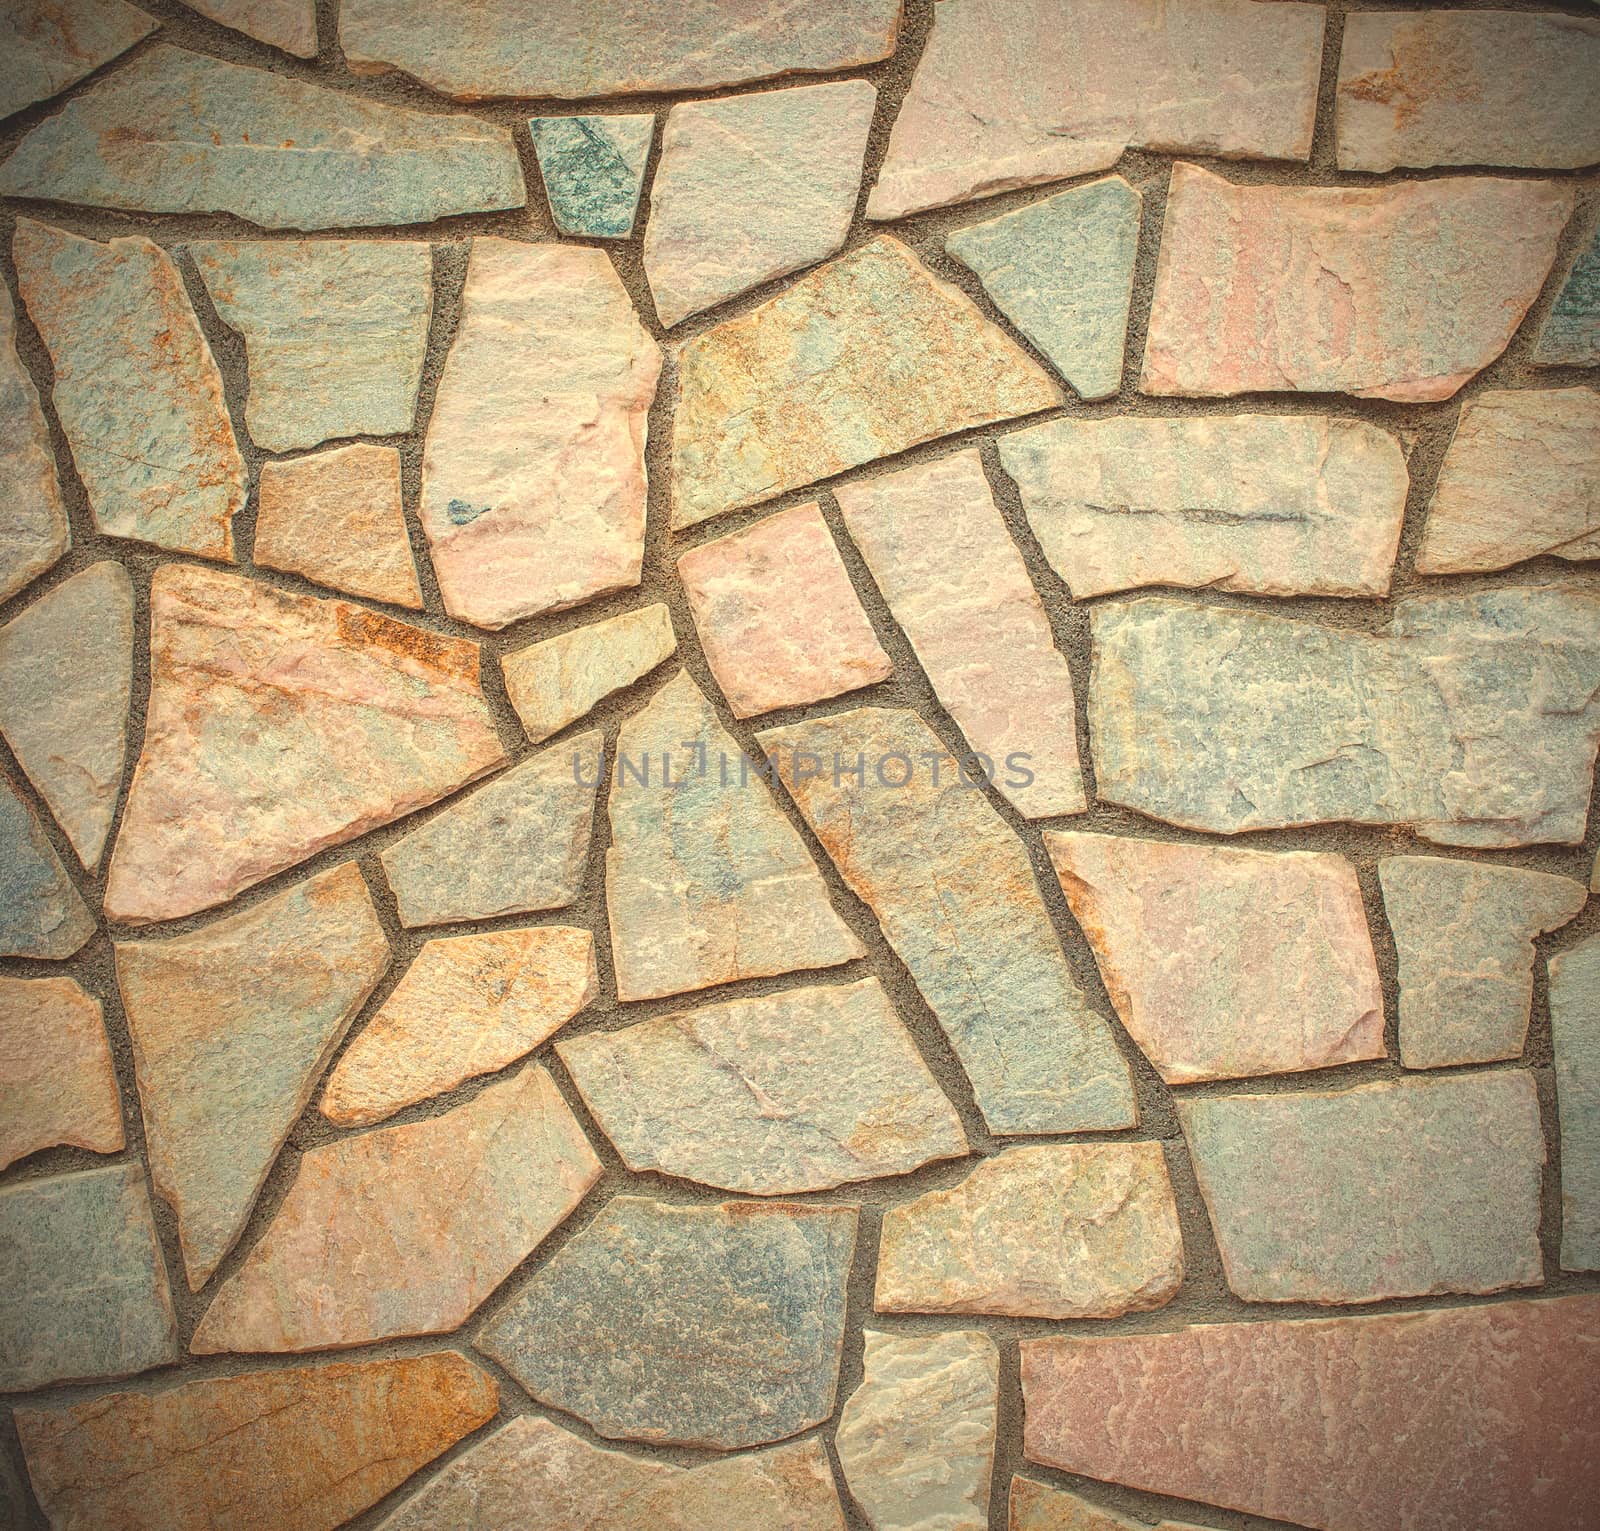 texture of stone wall, vintage background. instagram image style